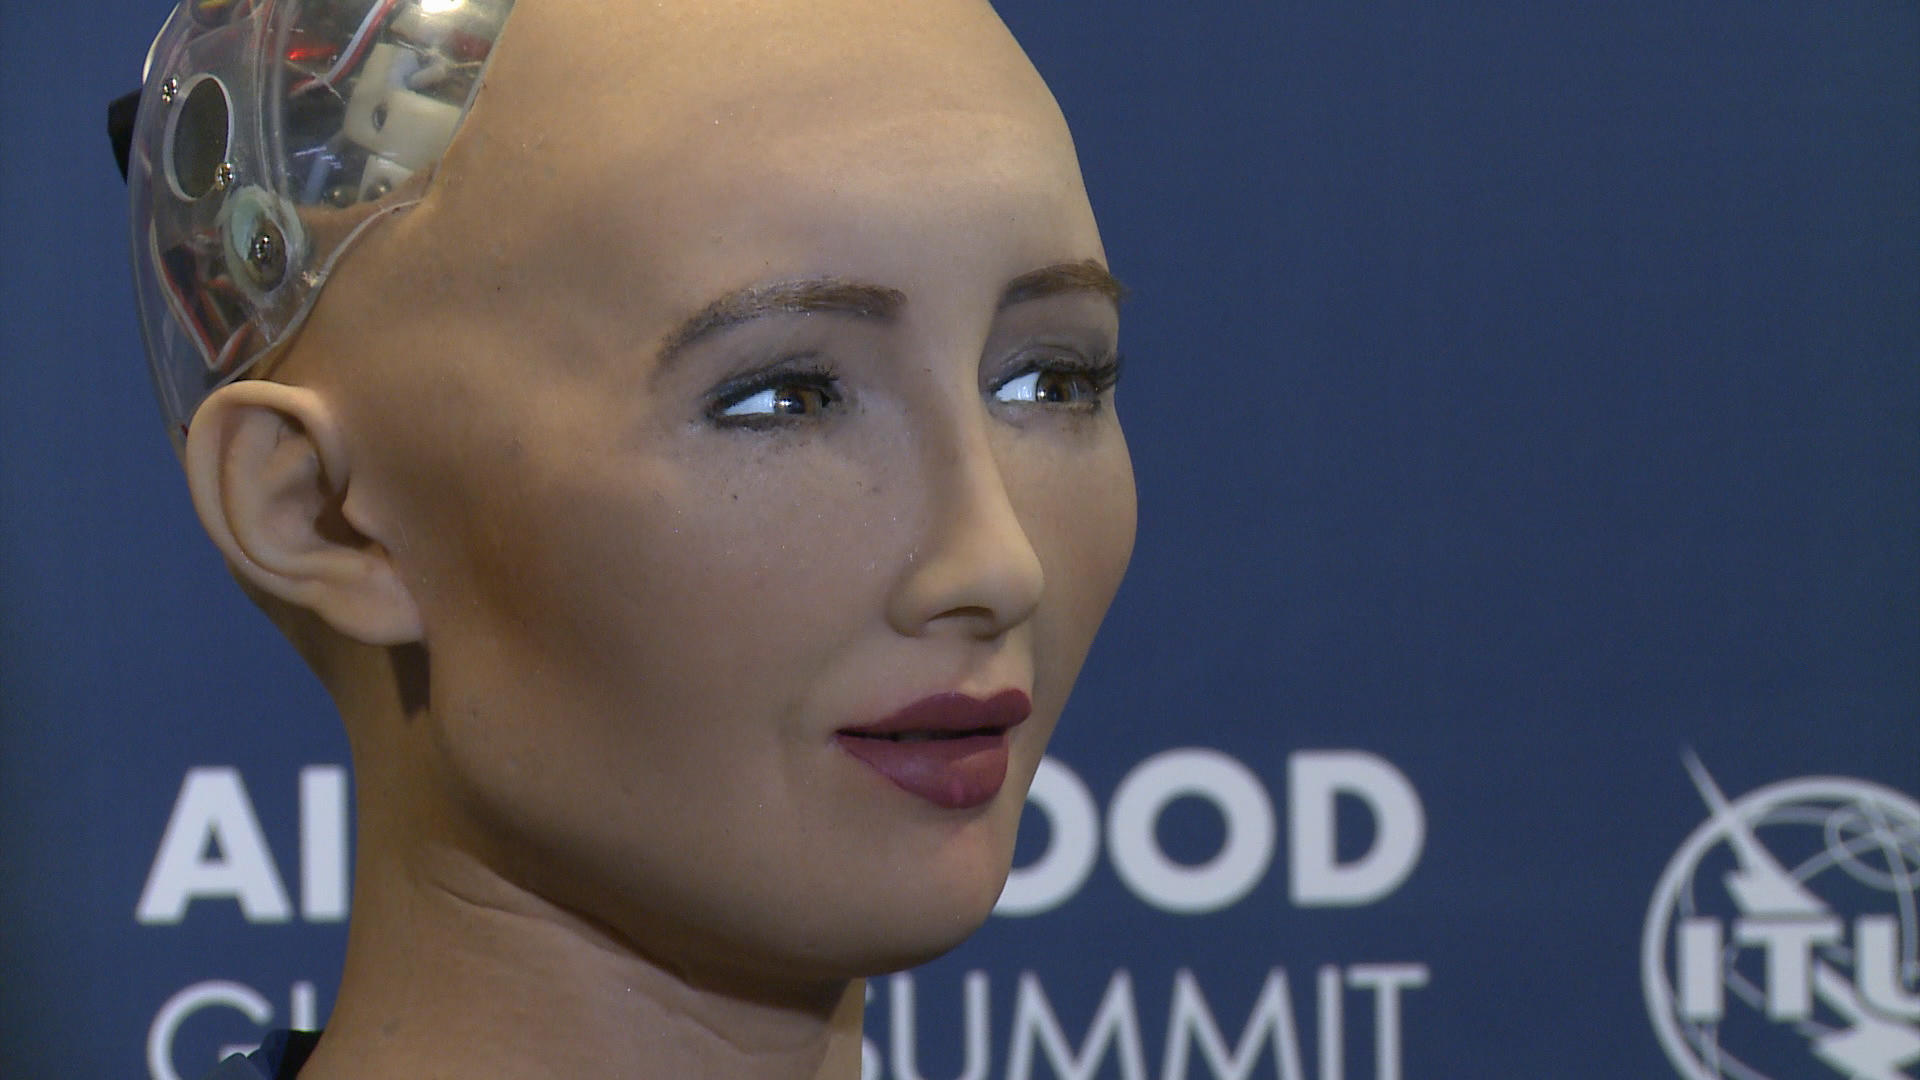 Robot Sophia was showcased at the AI for Good Global Summit